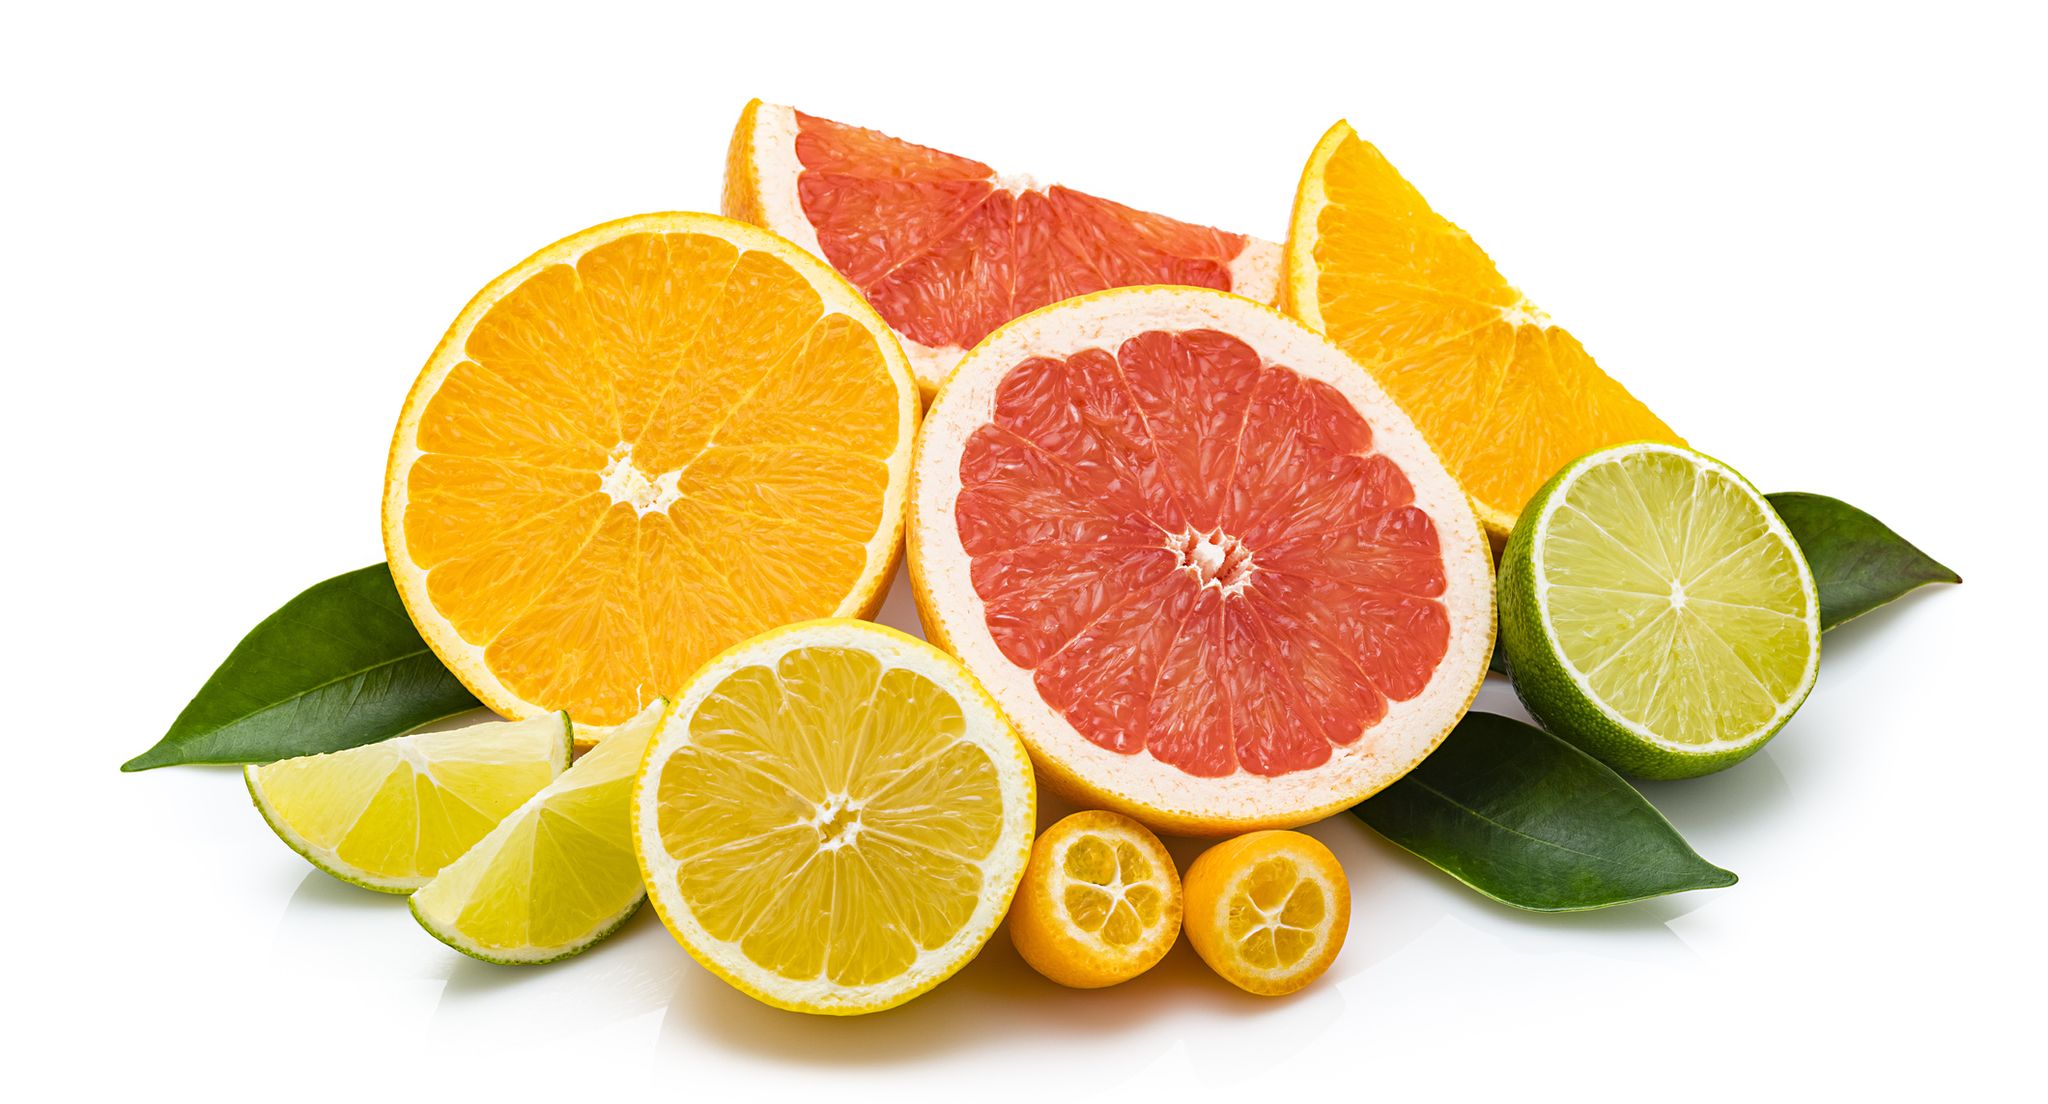 collection of whole and sliced citrus fruits isolated on white background